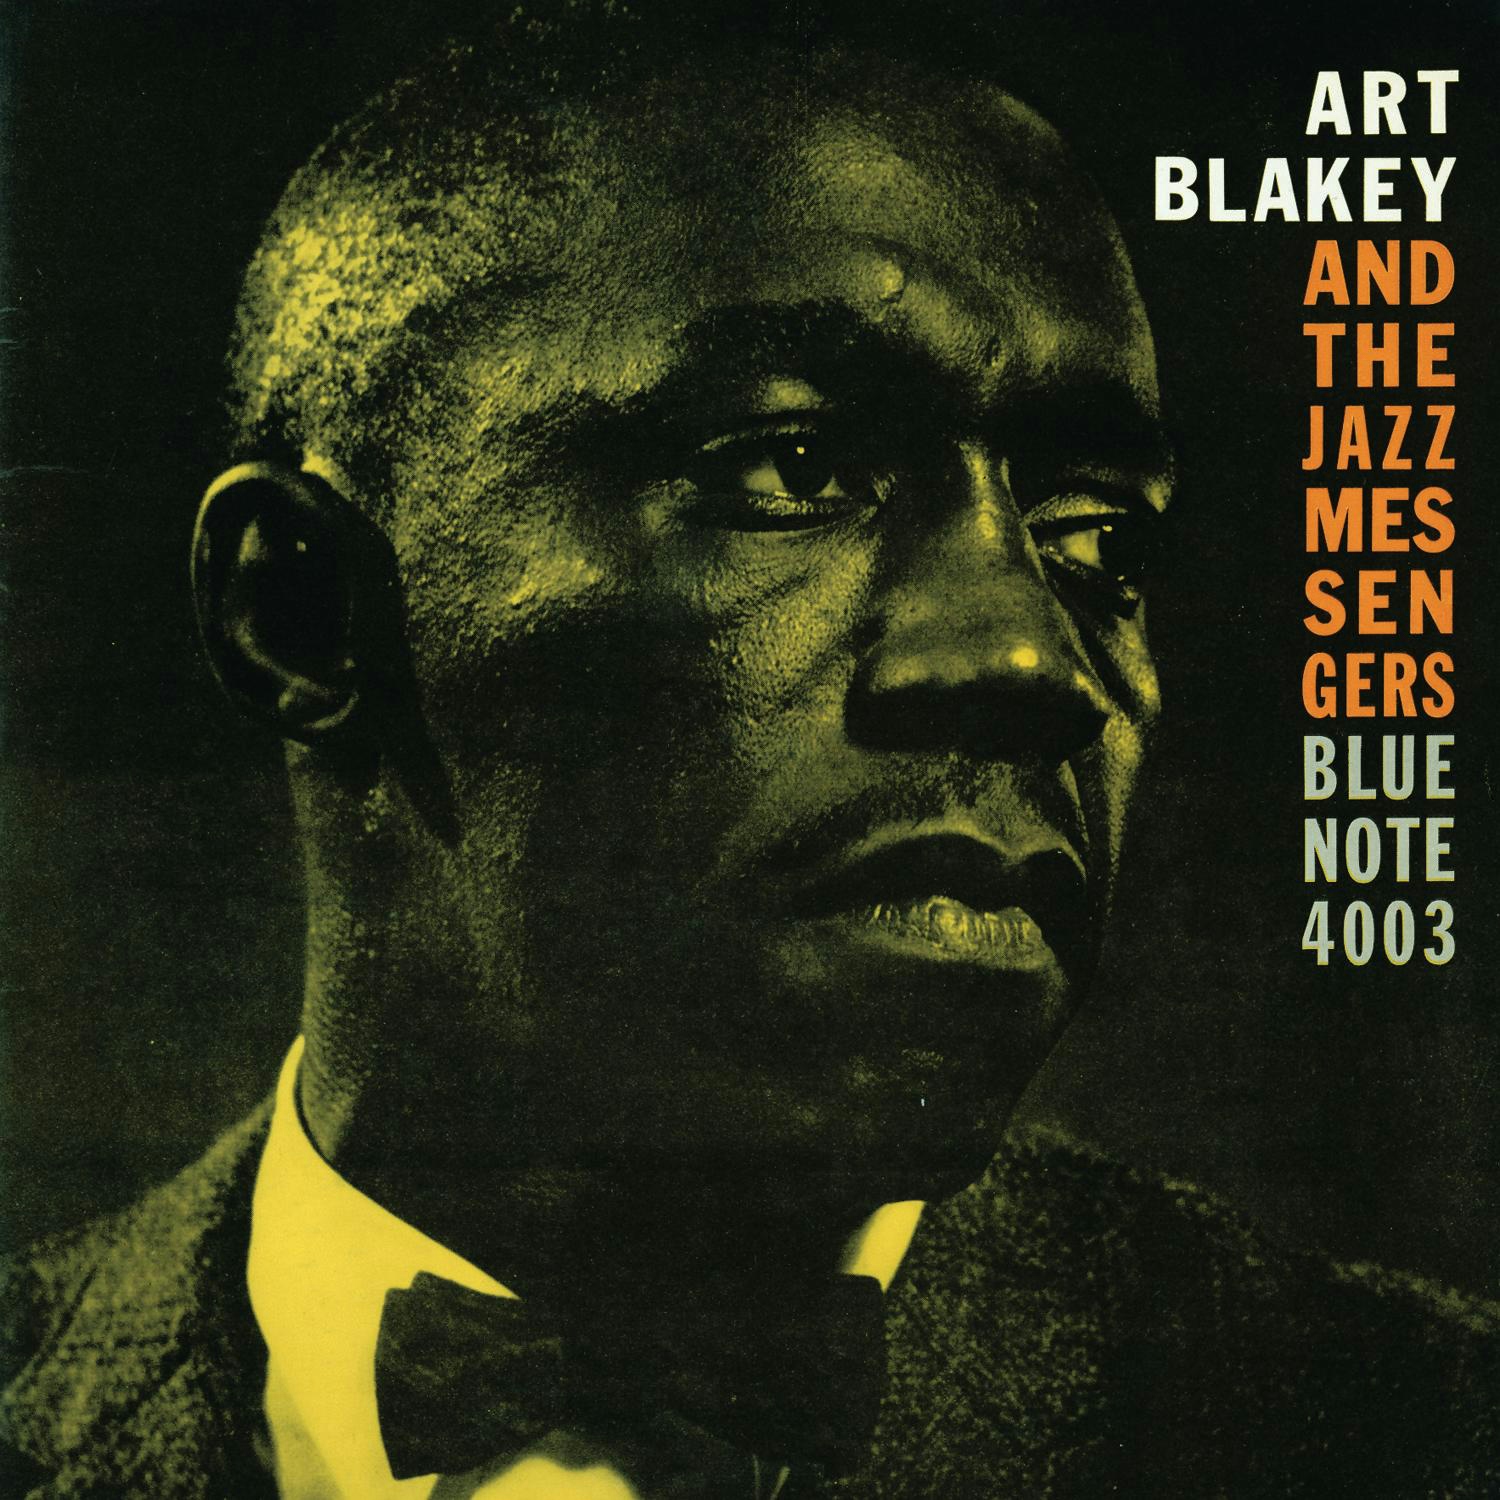 Album artwork for The Jazz Messengers (180g) by Art Blakey and the Jazz Messengers